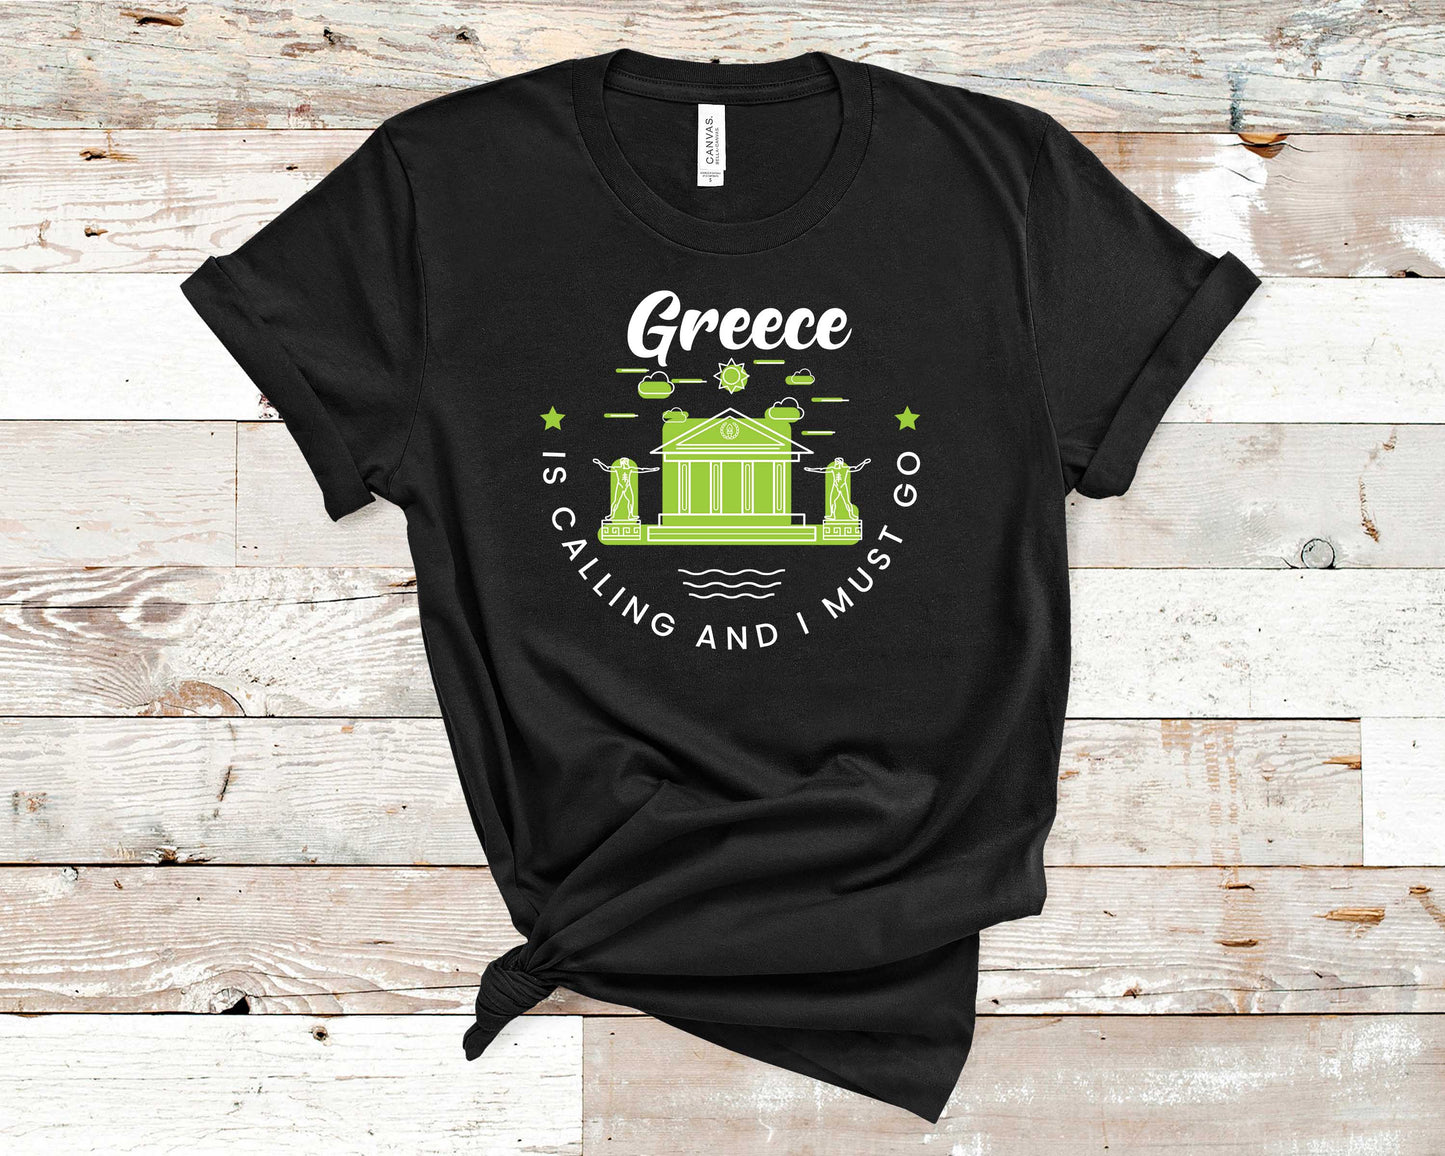 Greece Is Calling and I Must Go - Travel/Vacation